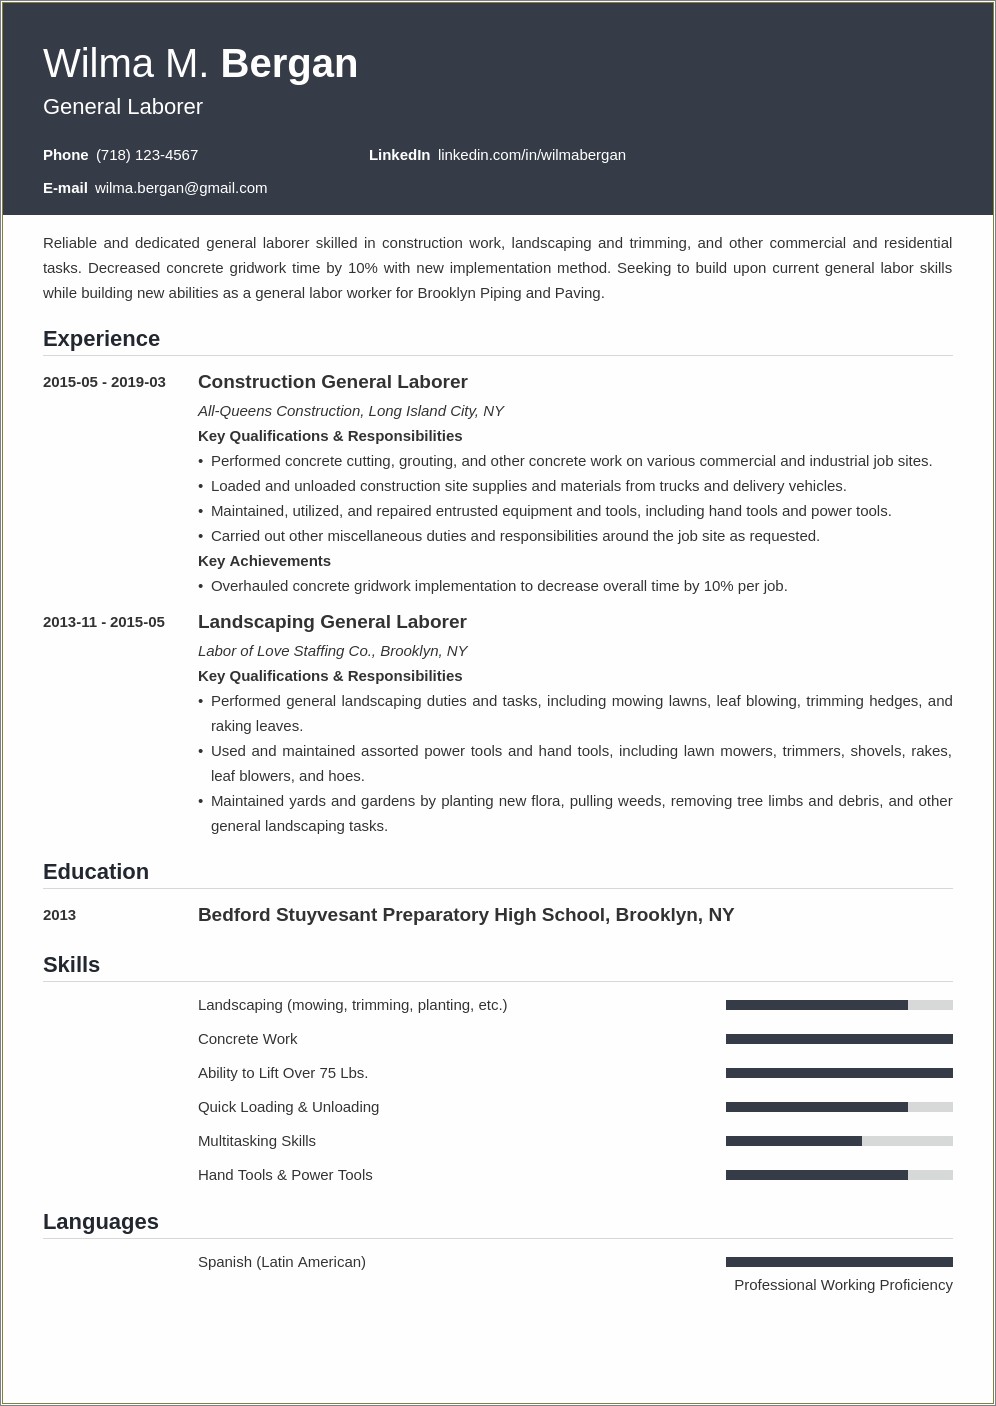 Generic Format Resume Template For Trade Skilled Labor